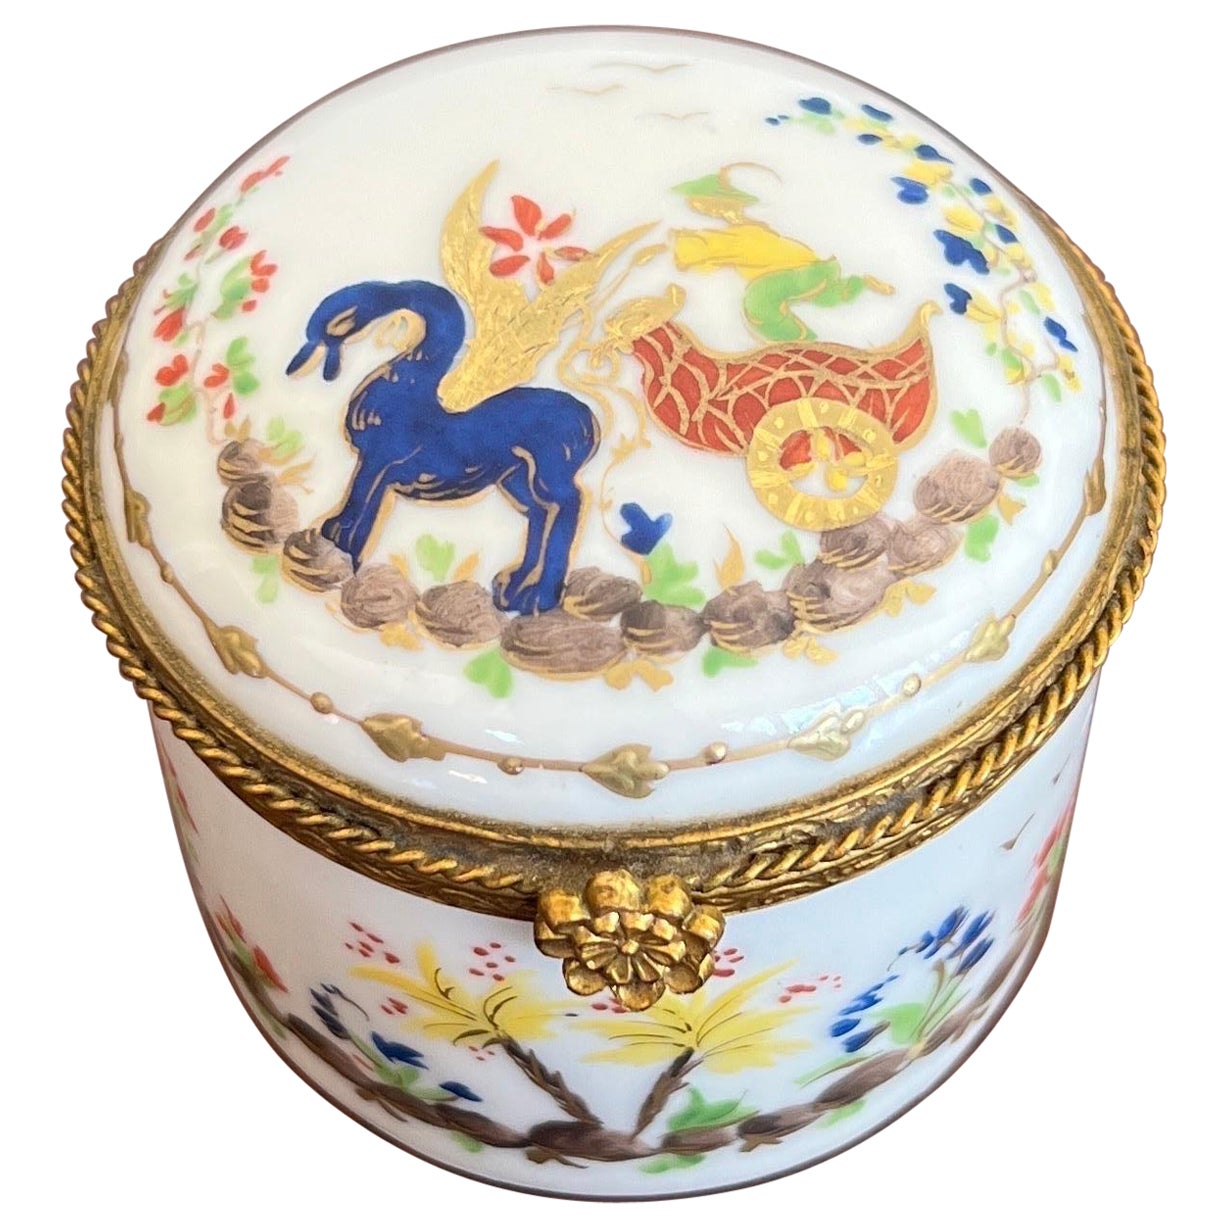 Tiffany Le Tallec Cirque Chinois Porcelain Box For Sale